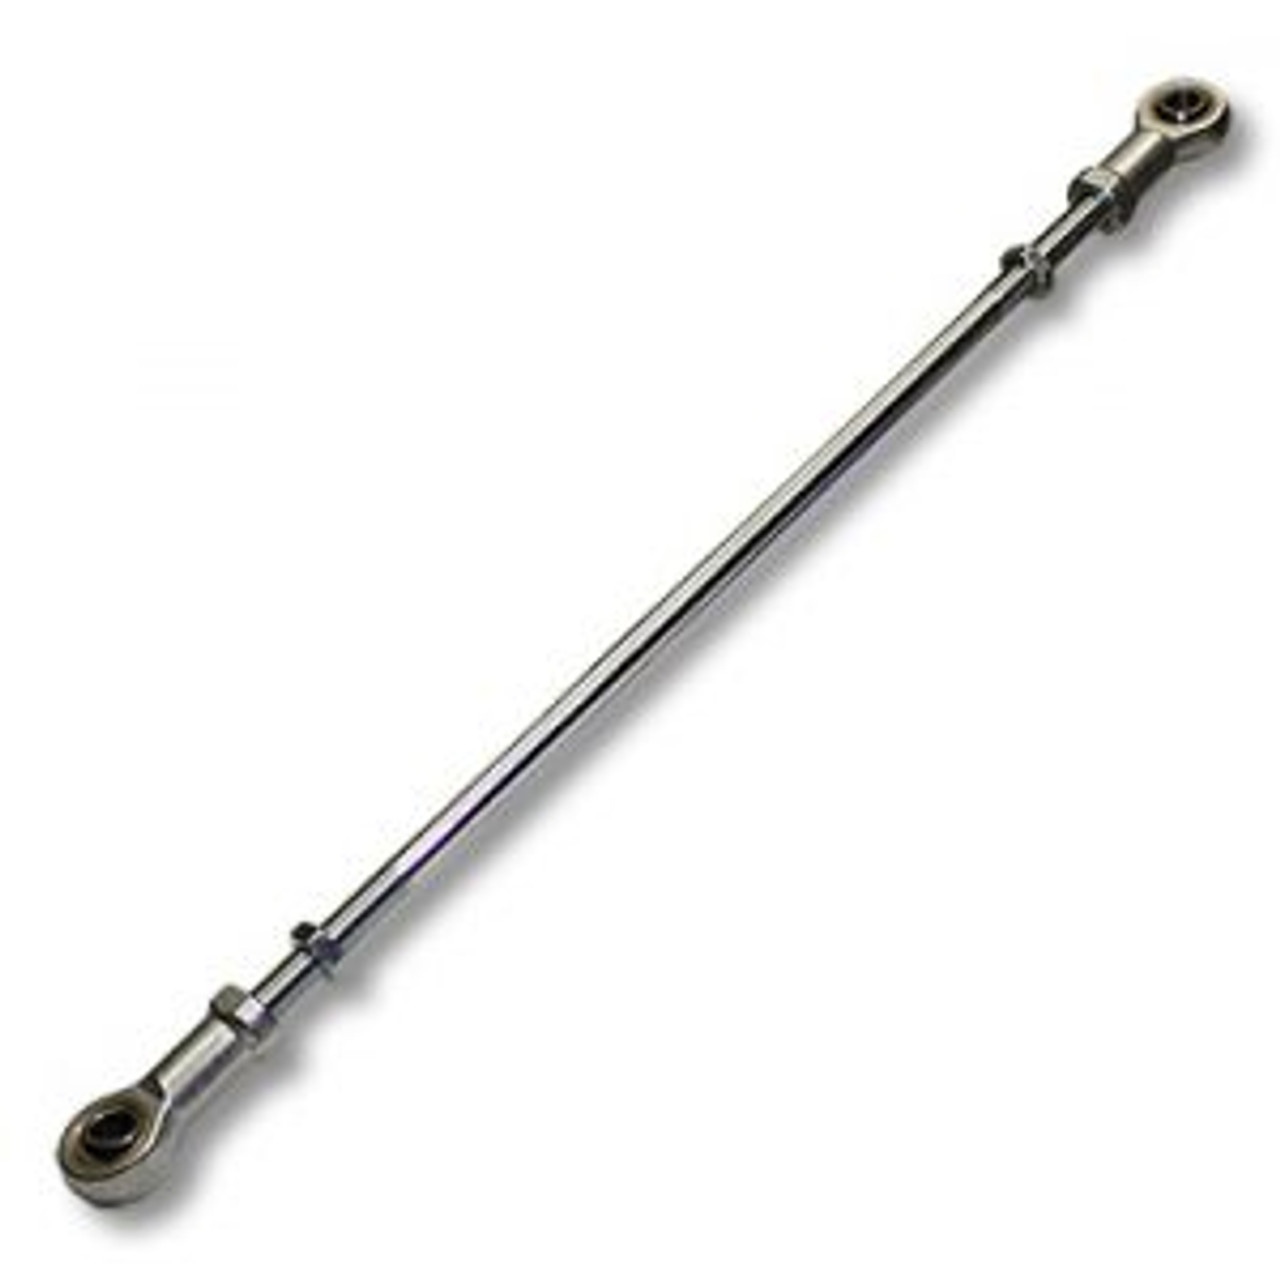 Solid Tie Rod Kit With Deluxe Rod Ends - 3/8-24, 13" Length